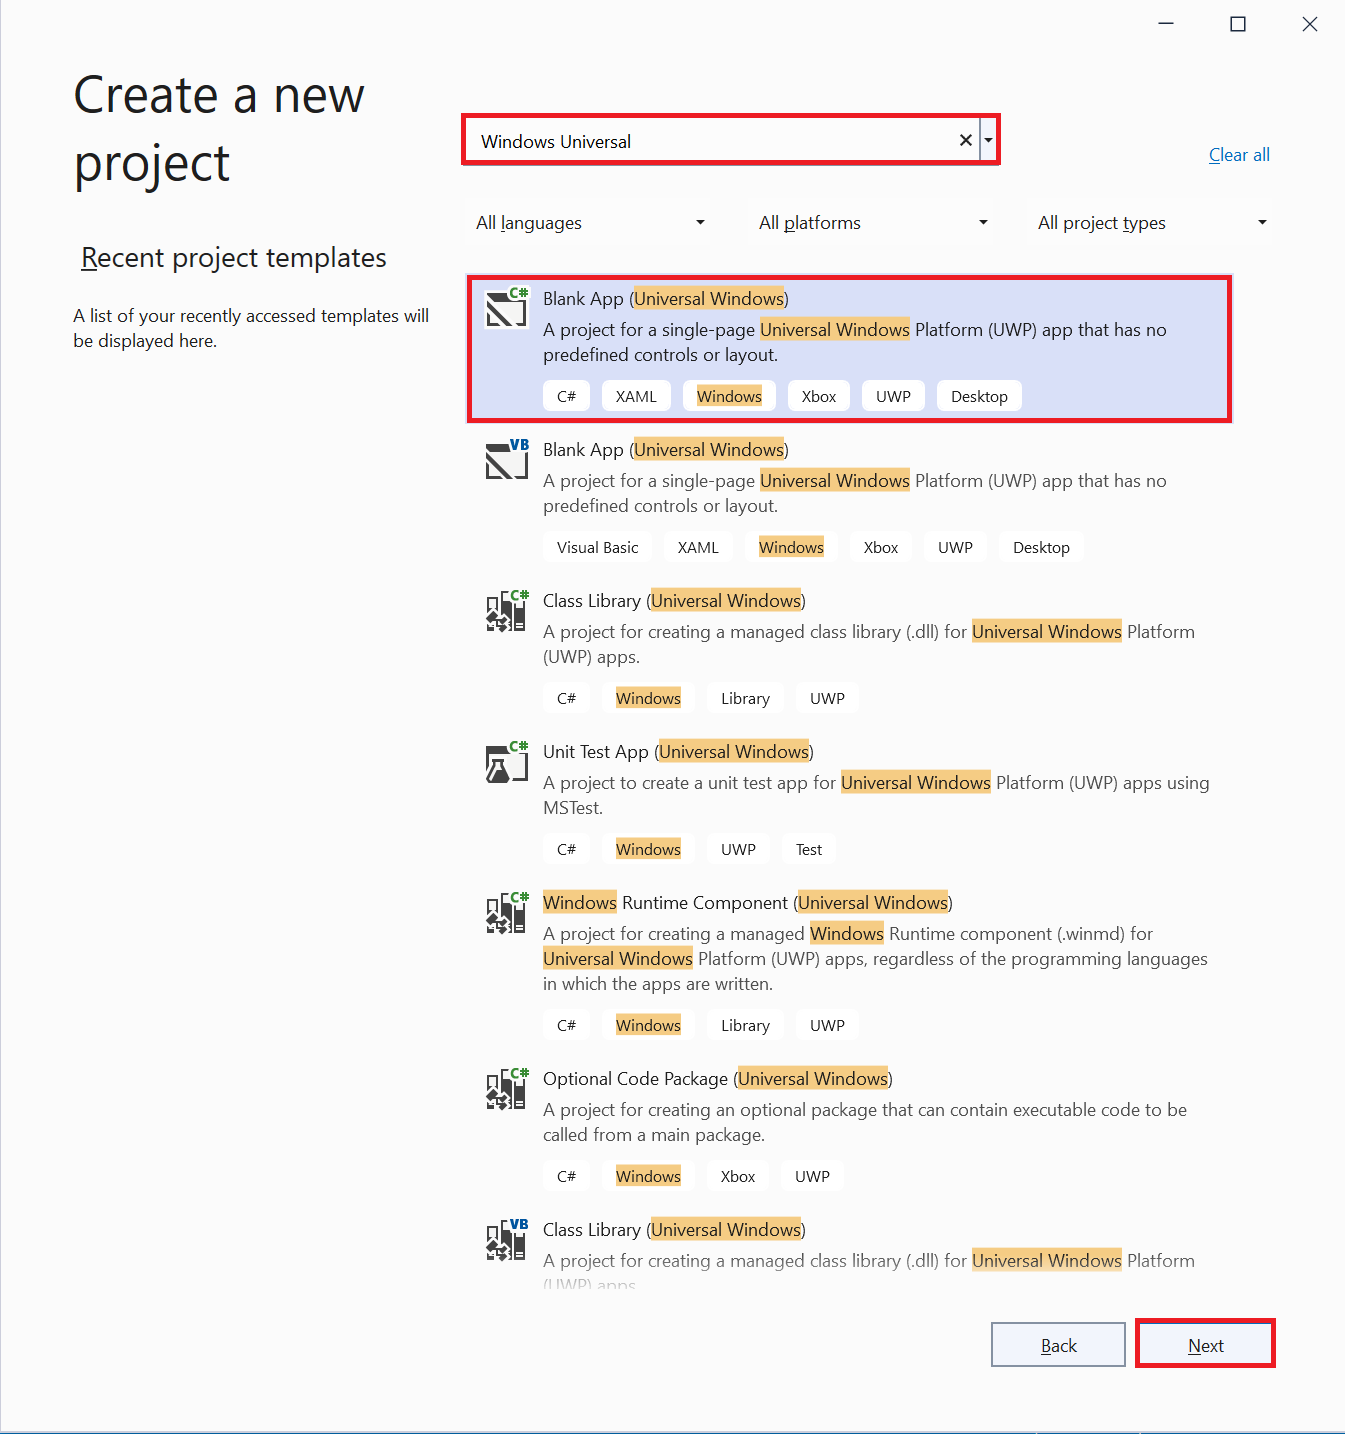 Screenshot of the create a new project window. The search bar contains the text Windows Universal and is highlighted along with the correct template.